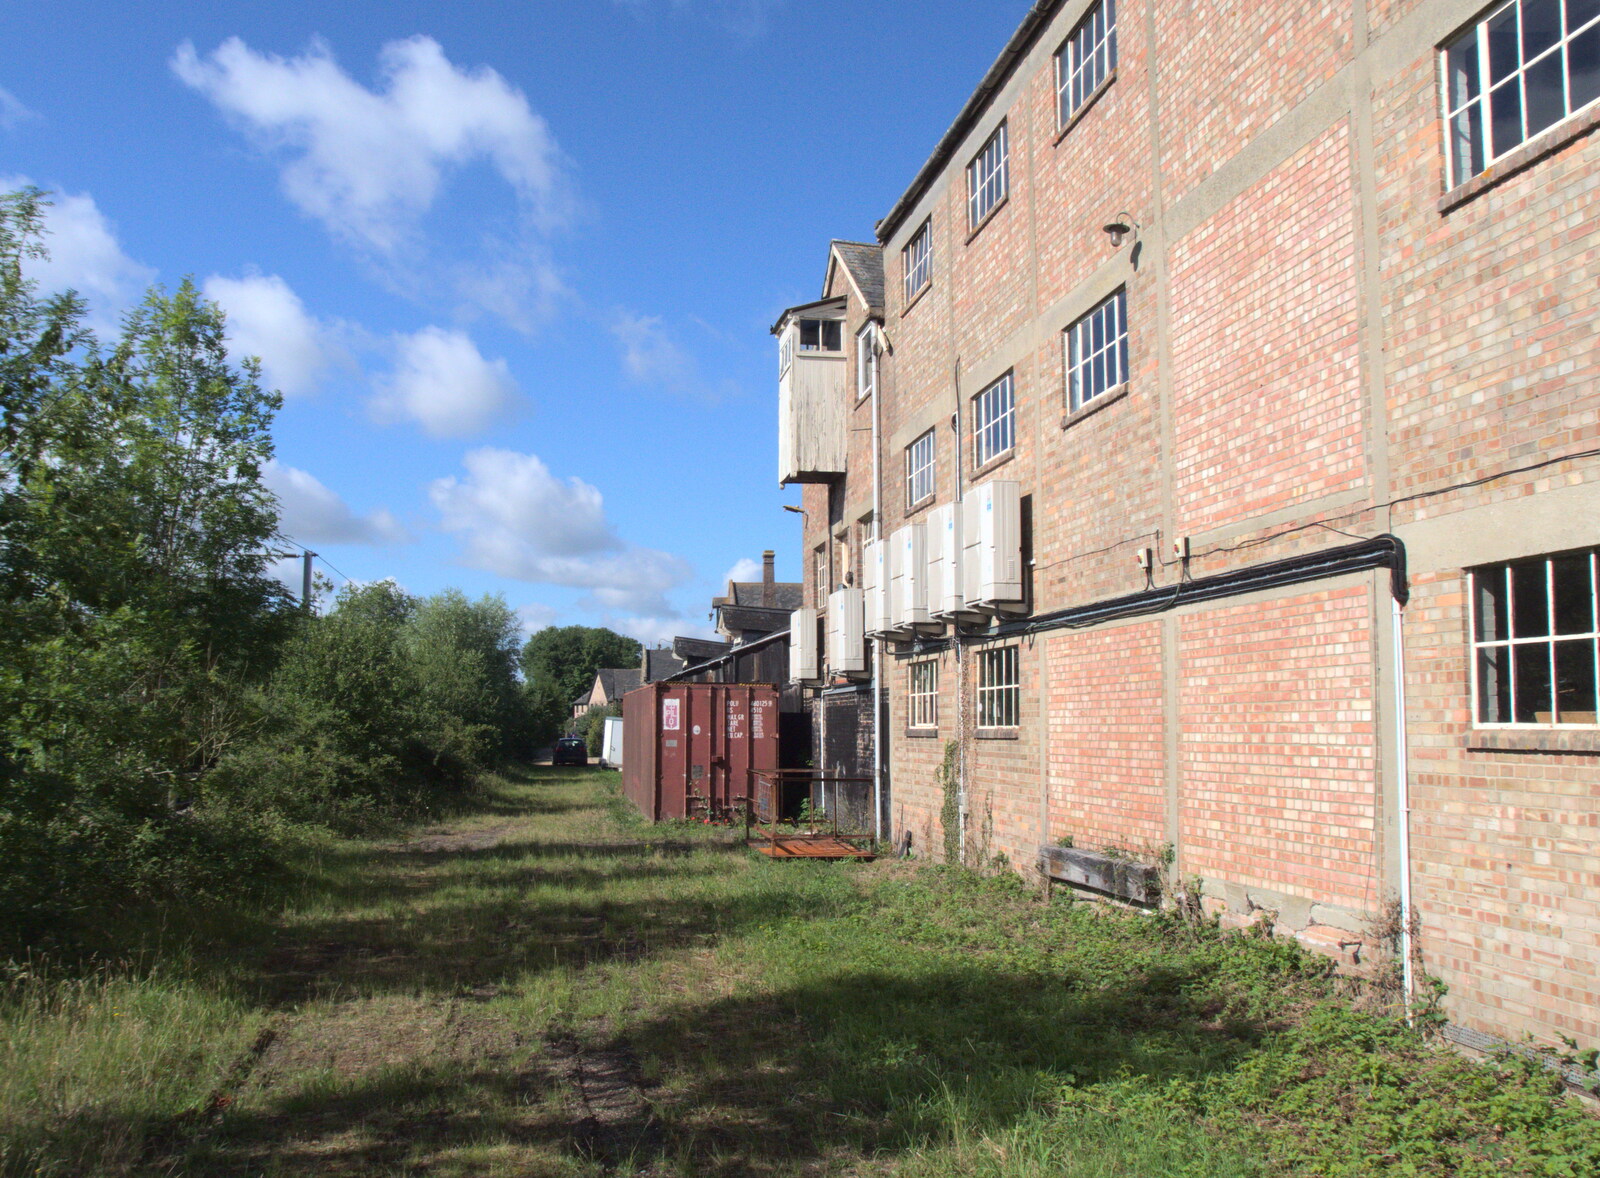 The back of the old MultiYork building from Lockdown Bike Rides and an Anniversary Picnic, Mellis and Brome, Suffolk - 3rd July 2020